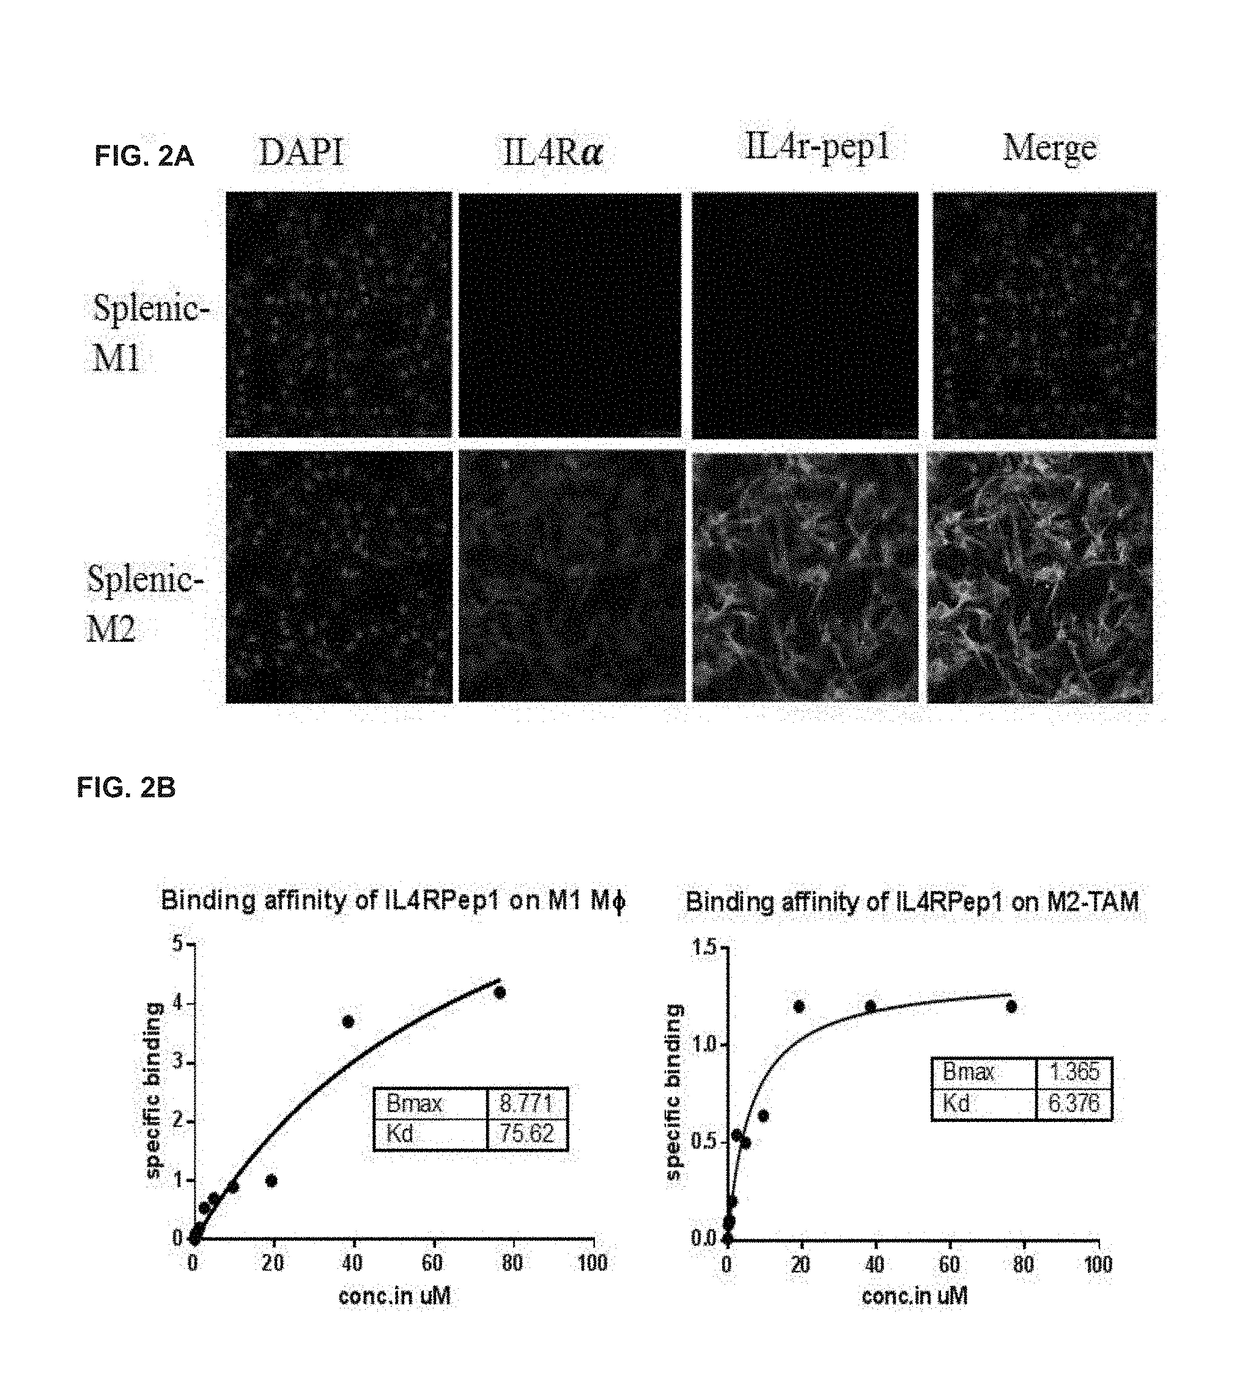 Pharmaceutical composition that is anticancer and suppresses cancer metastasis, containing, as active ingredient, fusion peptide simultaneously targeting cancer cell and tumor associated macrophage